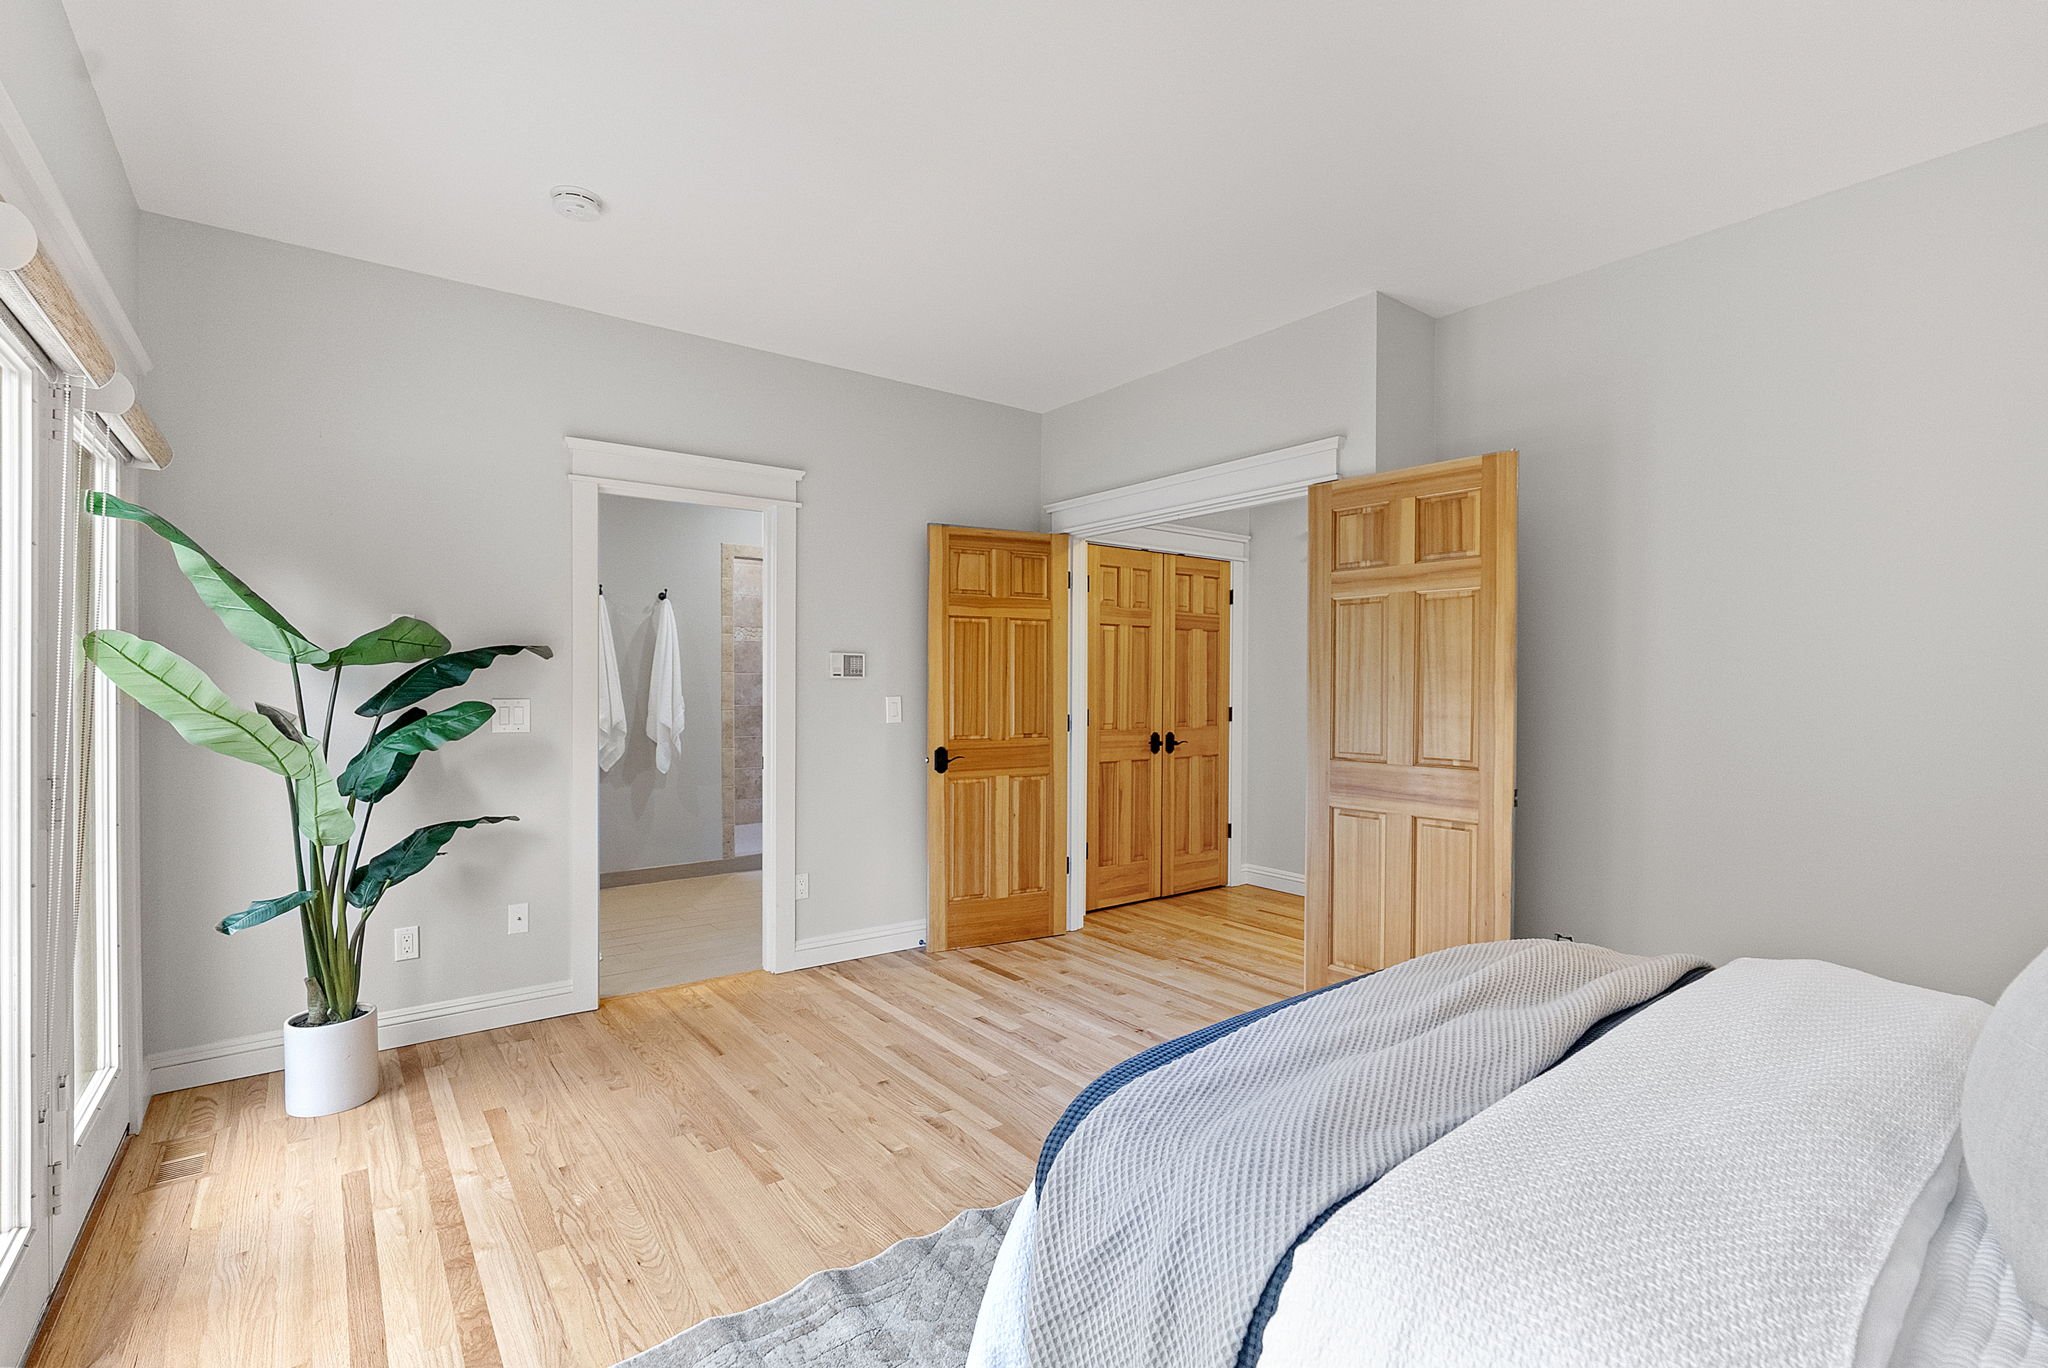 2-web-or-mls-3715-87th-ave-ct-nw.jpg